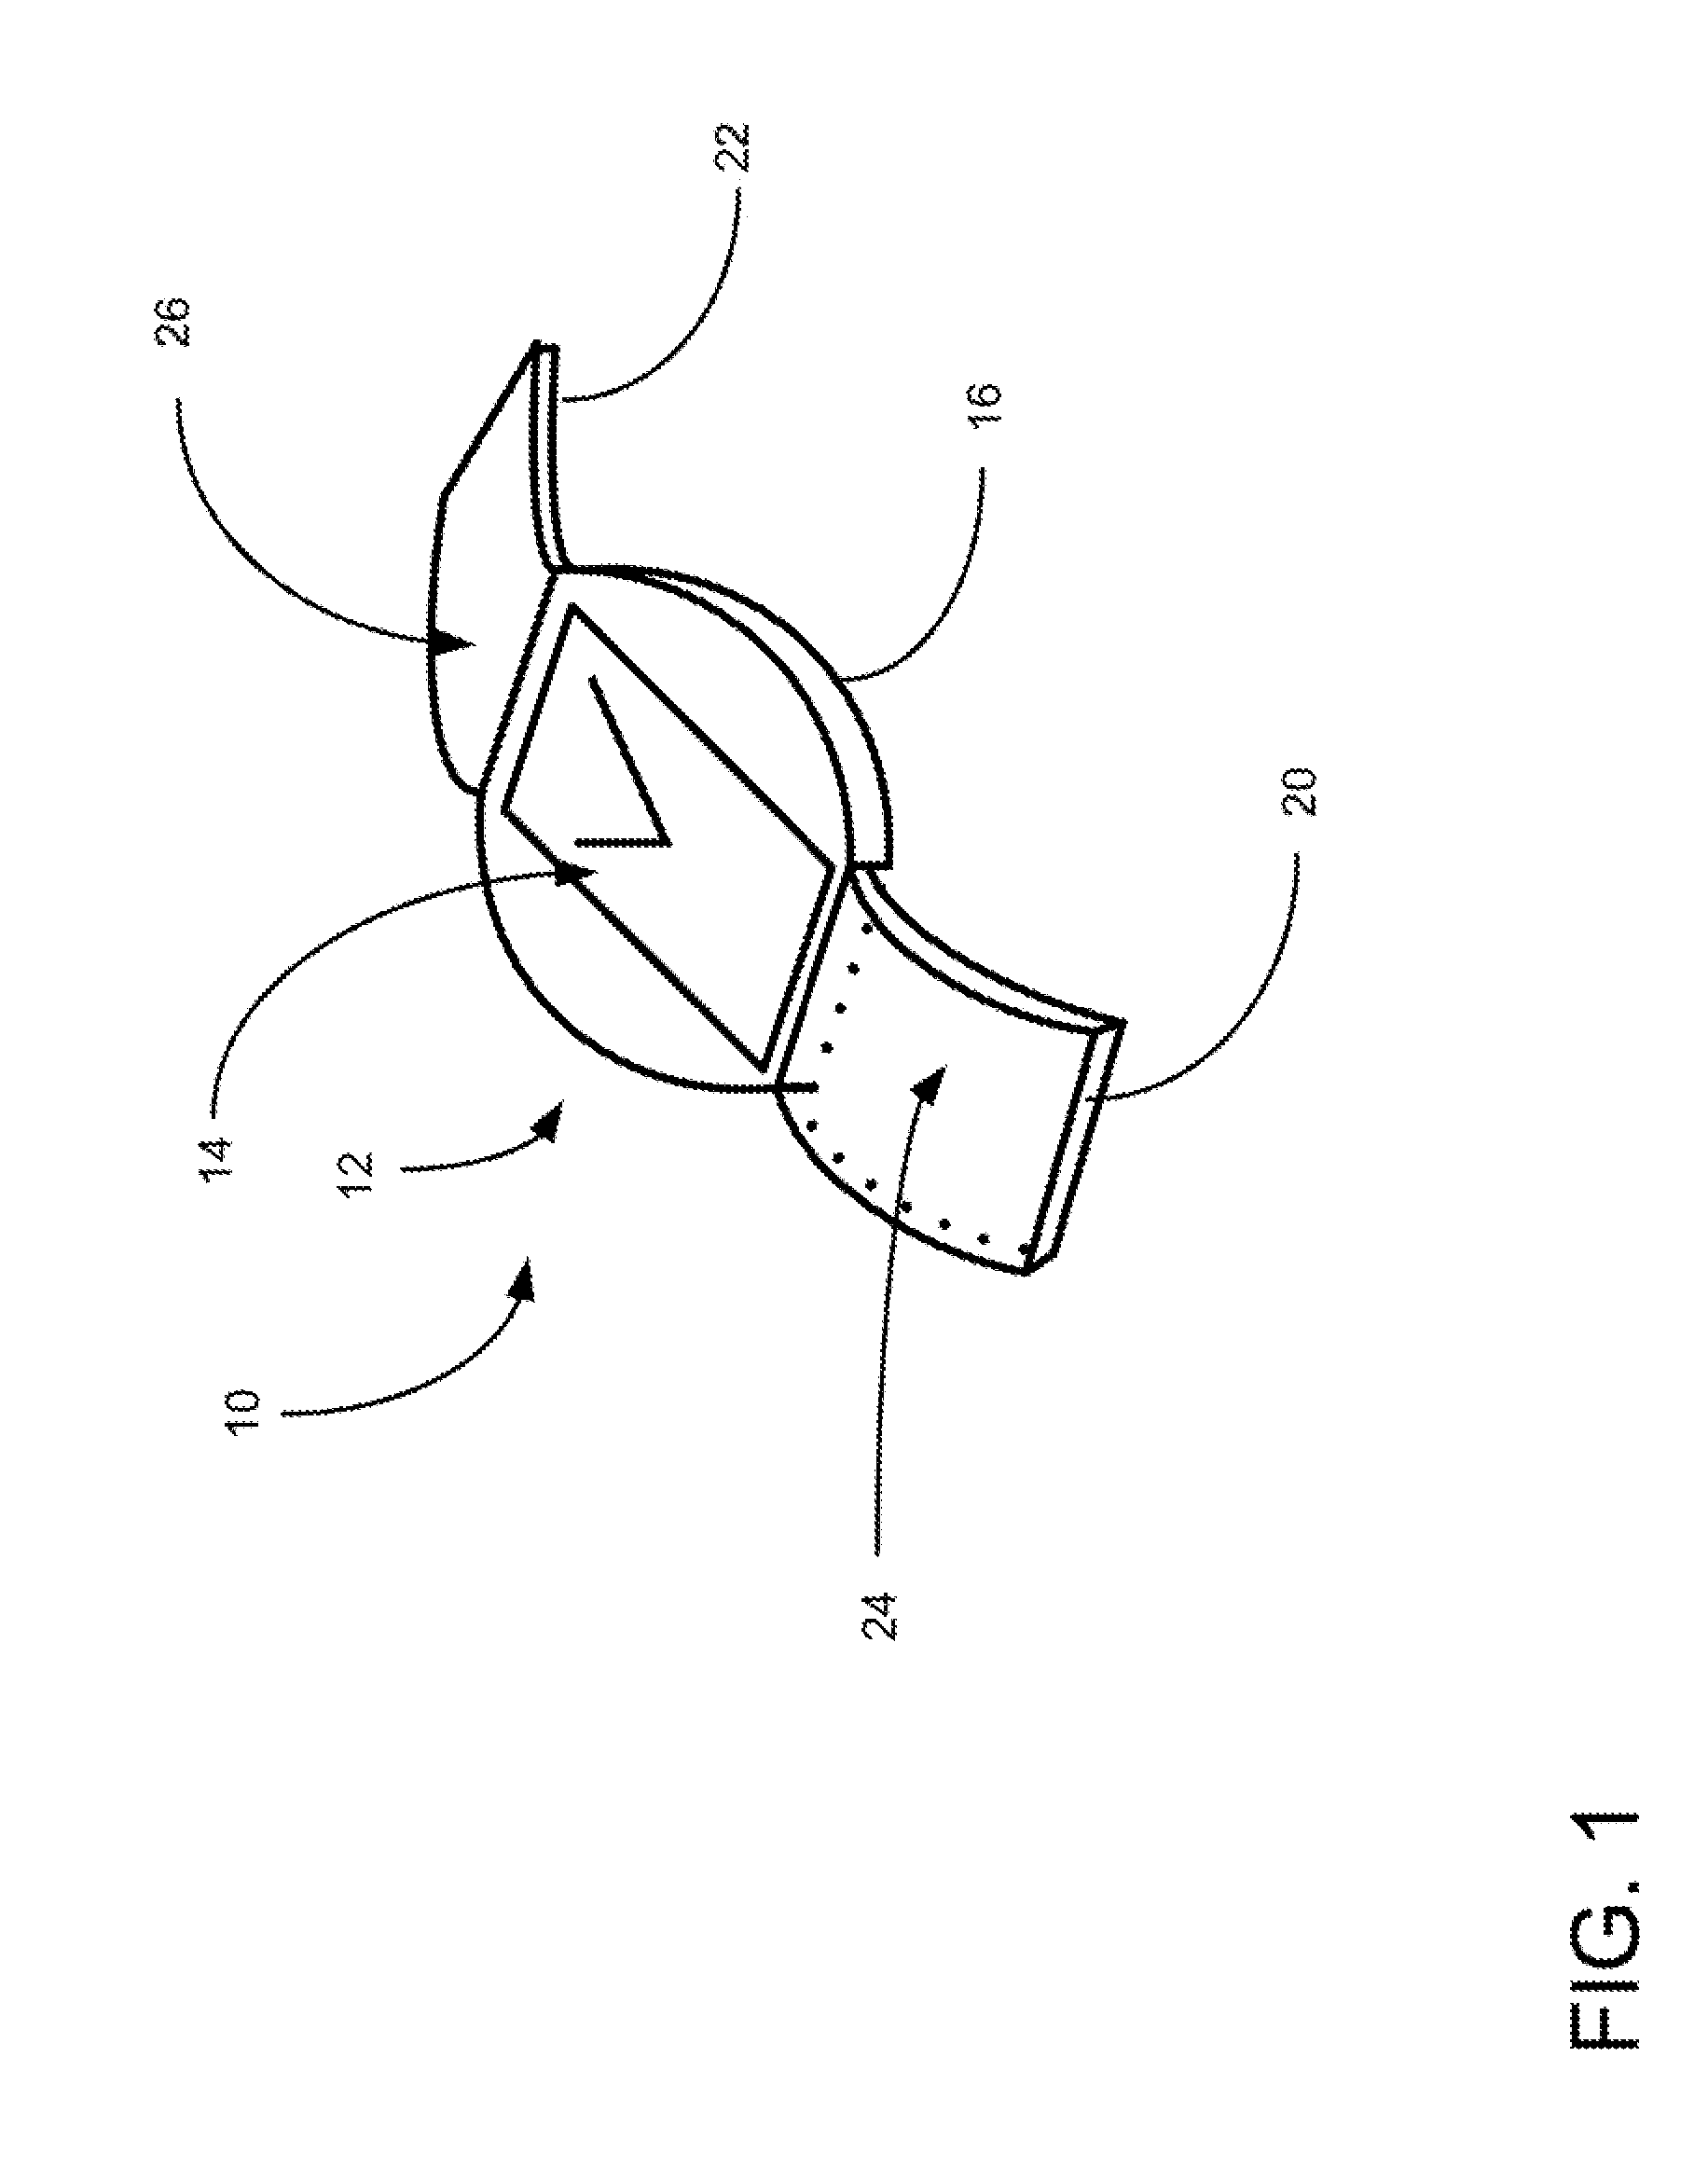 Watch Having an Interface to a Mobile Communications Device